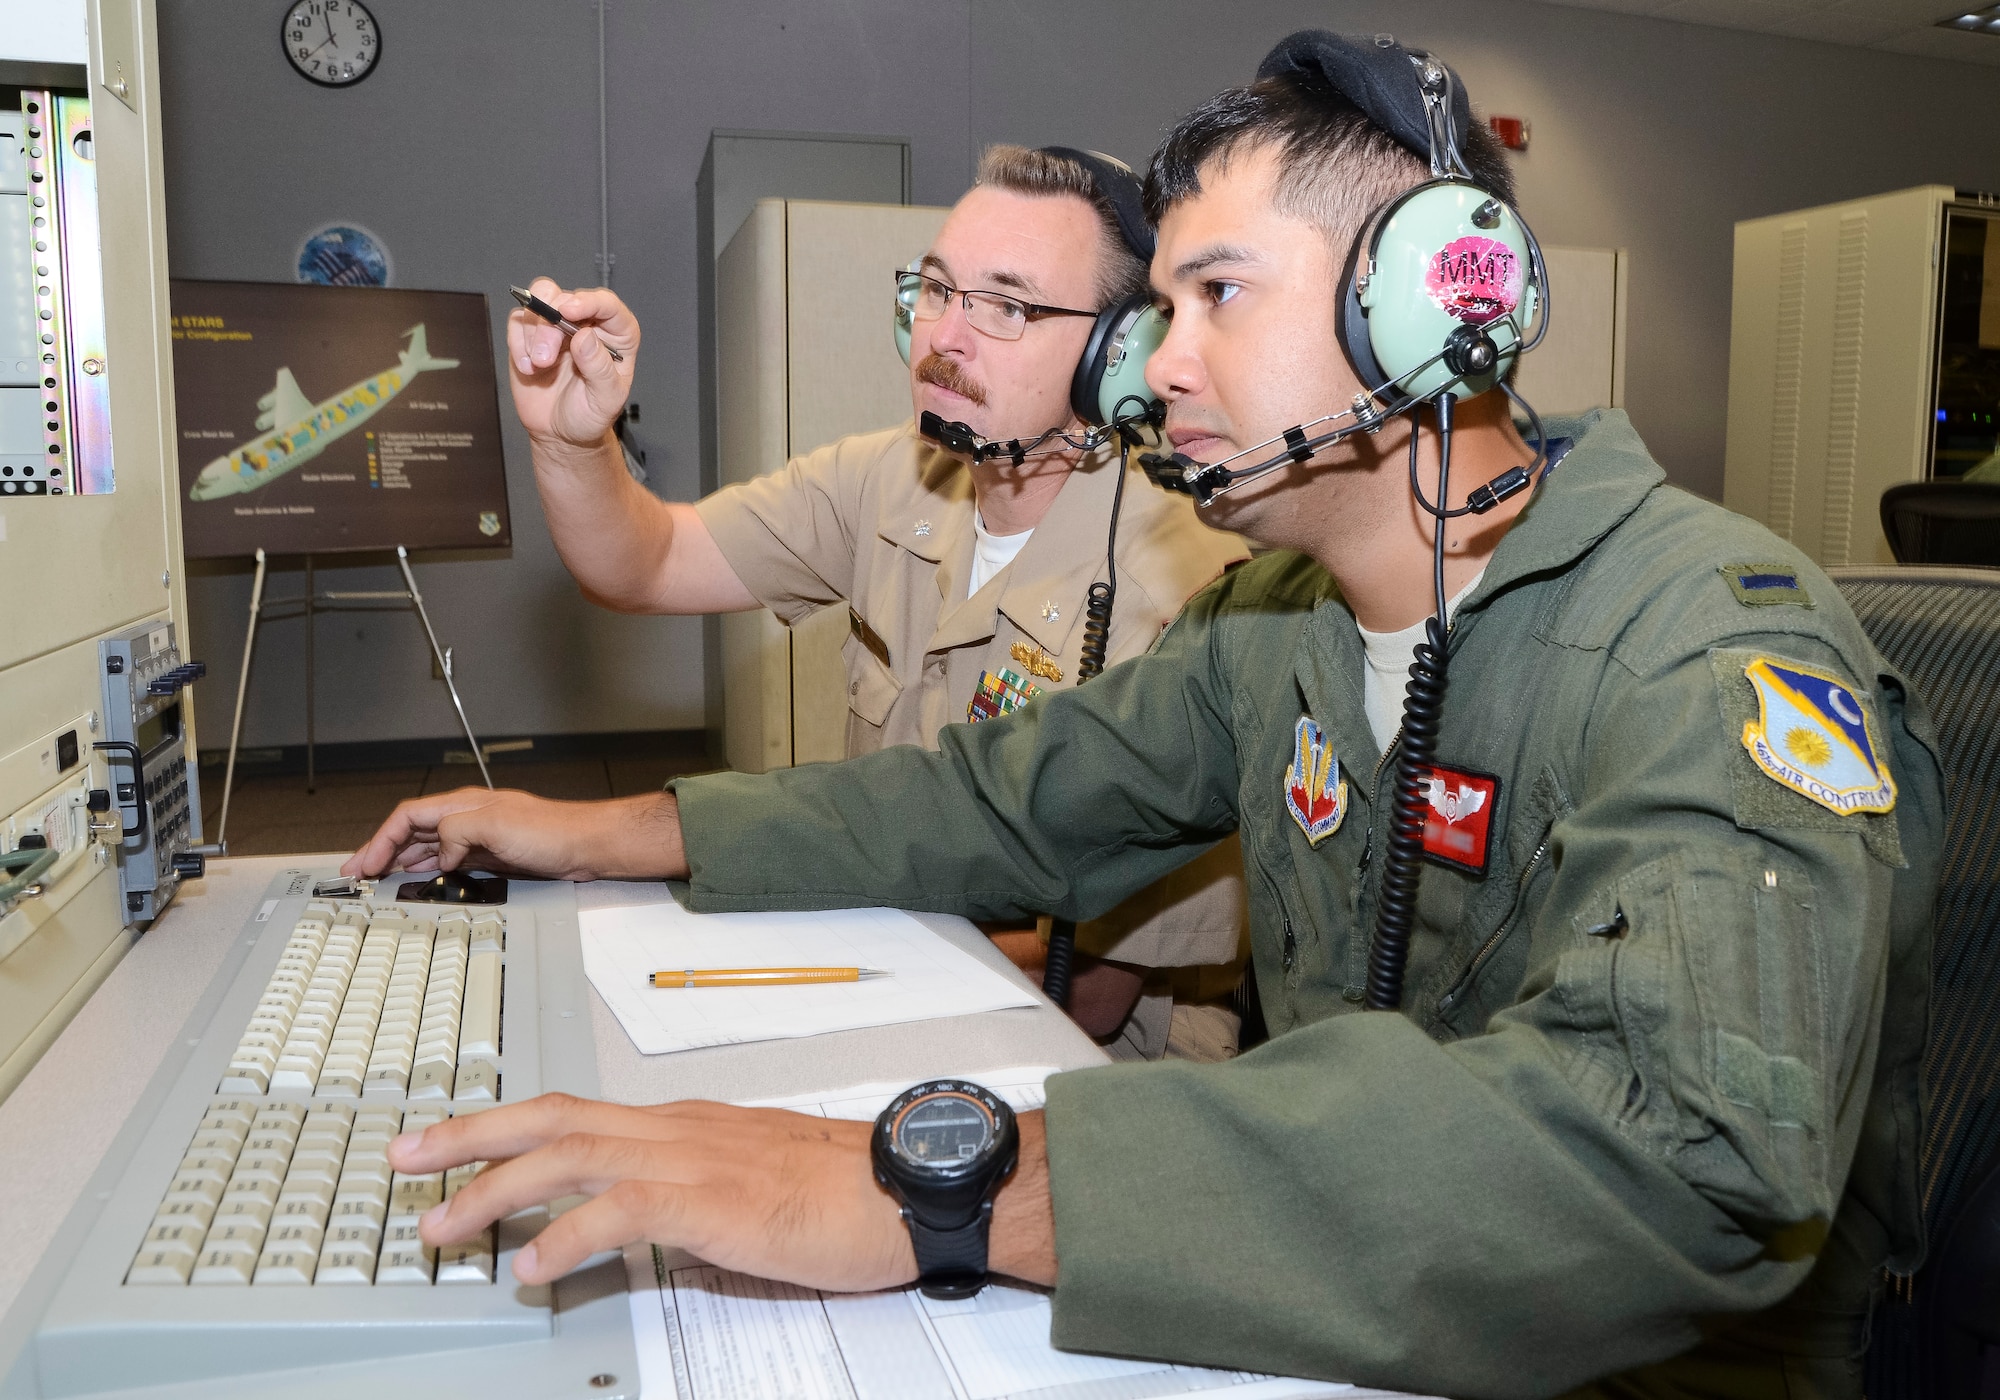 U.S. Air Force 1st Lt. Toby, 16th Airborne Command and Control Squadron air weapons officer, works alongside Cmdr. Mike Reed, U.S. Navy Third Fleet liaison officer, from a simulated E-8C Joint STARS operator workstation during Coalition Virtual Flag 13-4, Robins Air Force Base, Ga., Sept. 18, 2013. Exercise planners and aviators from the 116th and 461st Air Control wings, participated in the virtual exercise along with units from 23 different locations worldwide including Australia, Canada and the United Kingdom. Reed spent the week with JSTARS operators to learn more about how the Navy can benefit from the command and control, intelligence, surveillance and reconnaissance capabilities of the Joint STARS platform. (U.S. Air National Guard photo by Master Sgt. Roger Parsons/Released) (Portions of the photo have been blurred and the full name of the aviator has been withheld for security purposes)